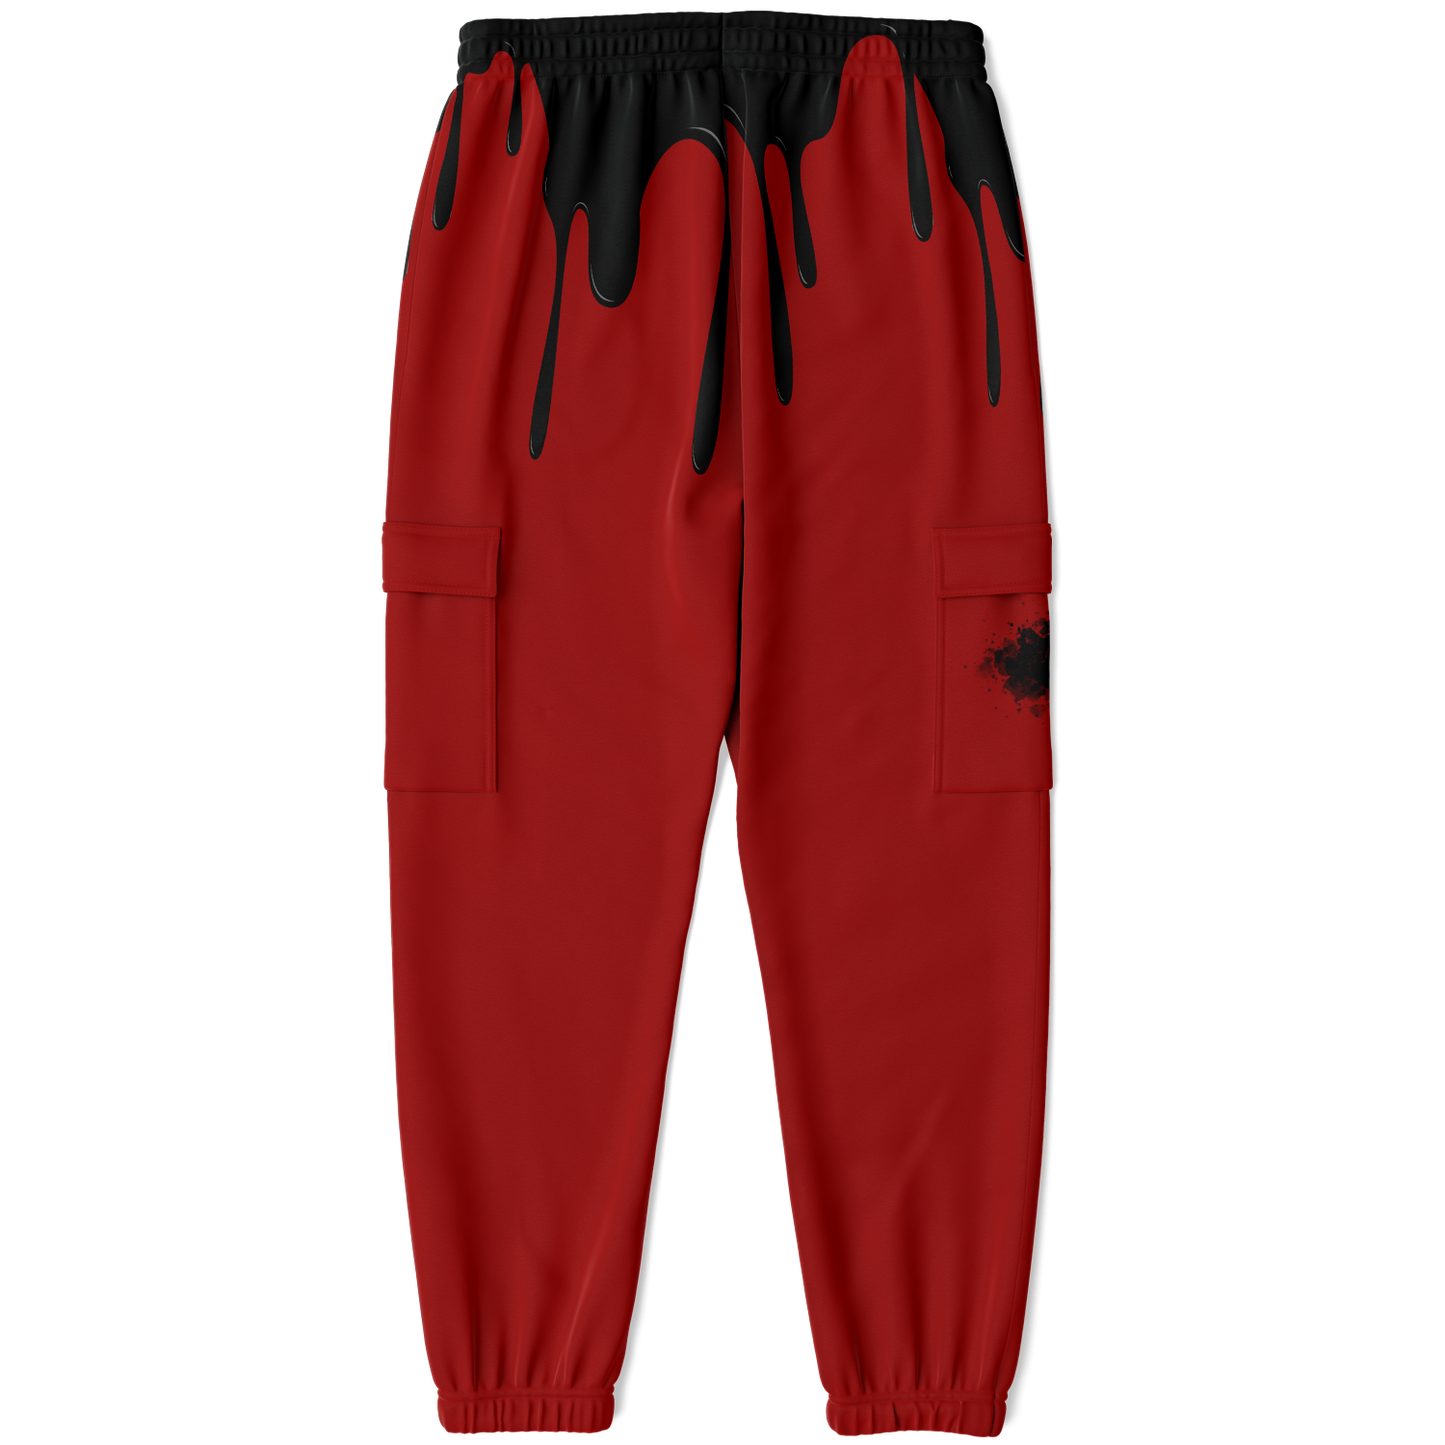 SWEATPANTS - Red - Dripping Paint